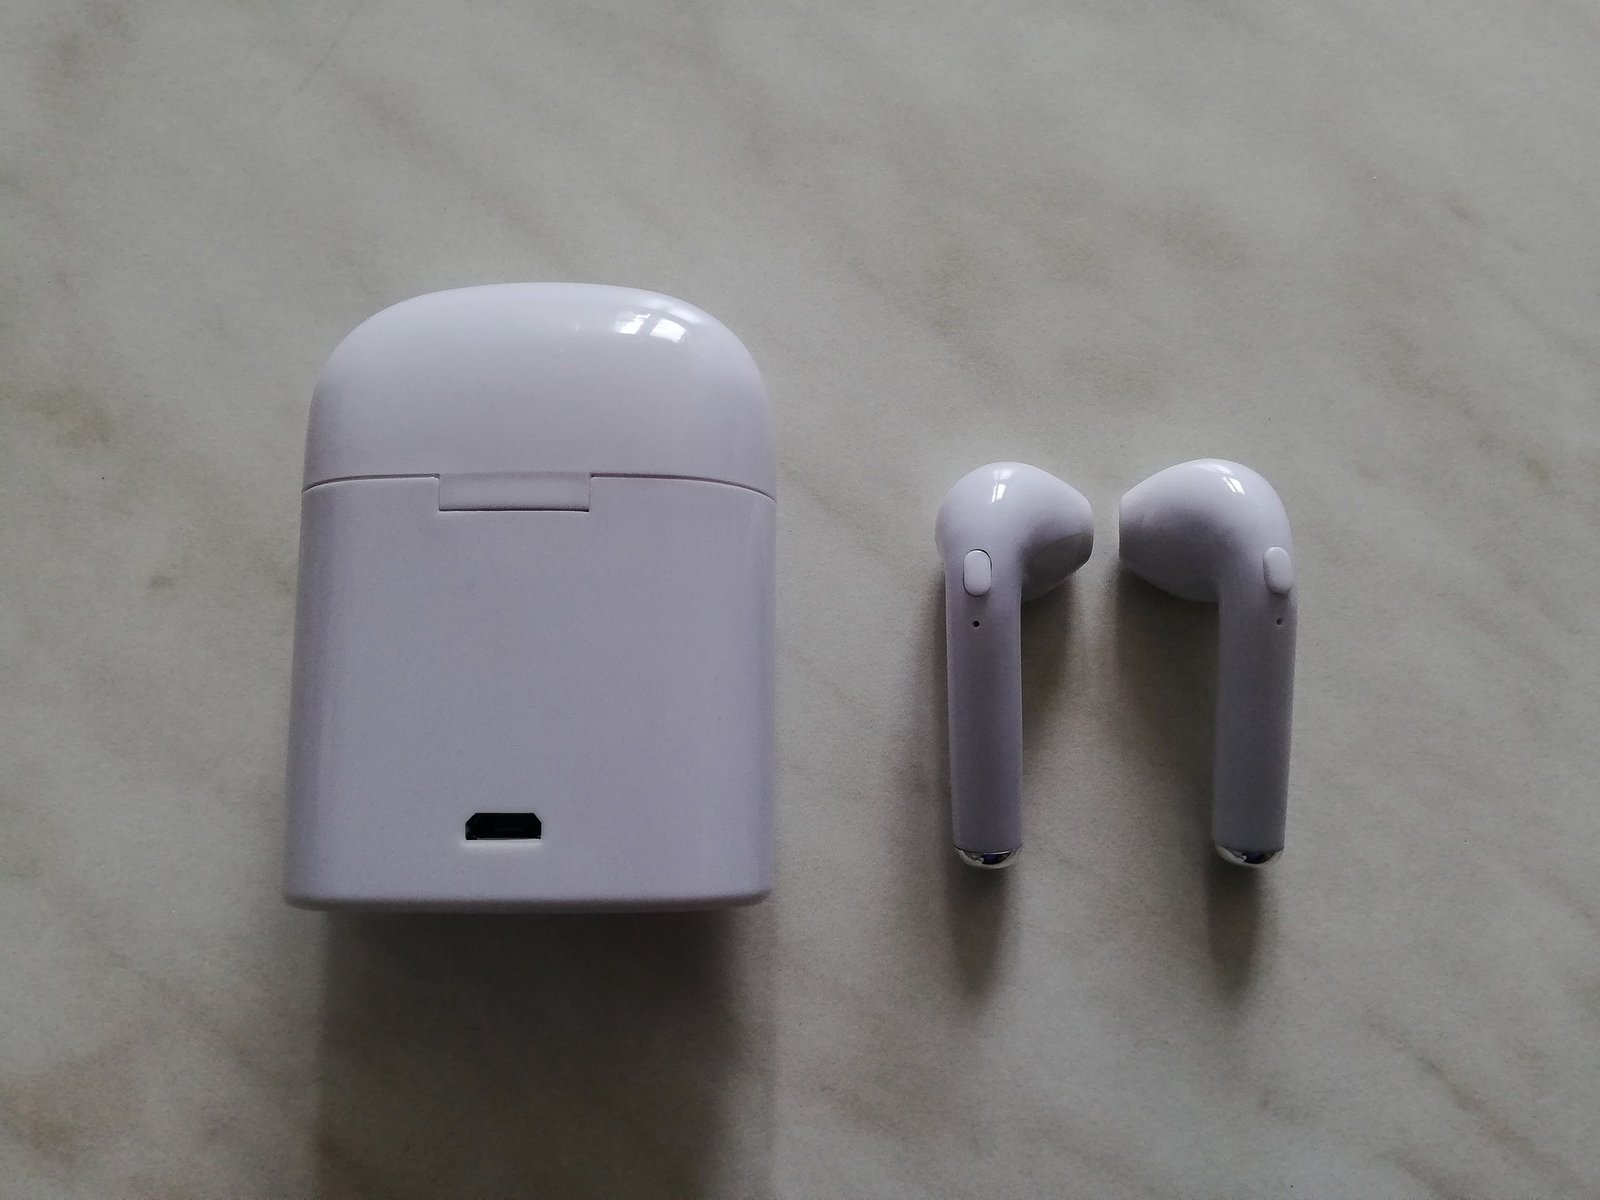 Why Won't My Airpods Connect To My Macbook